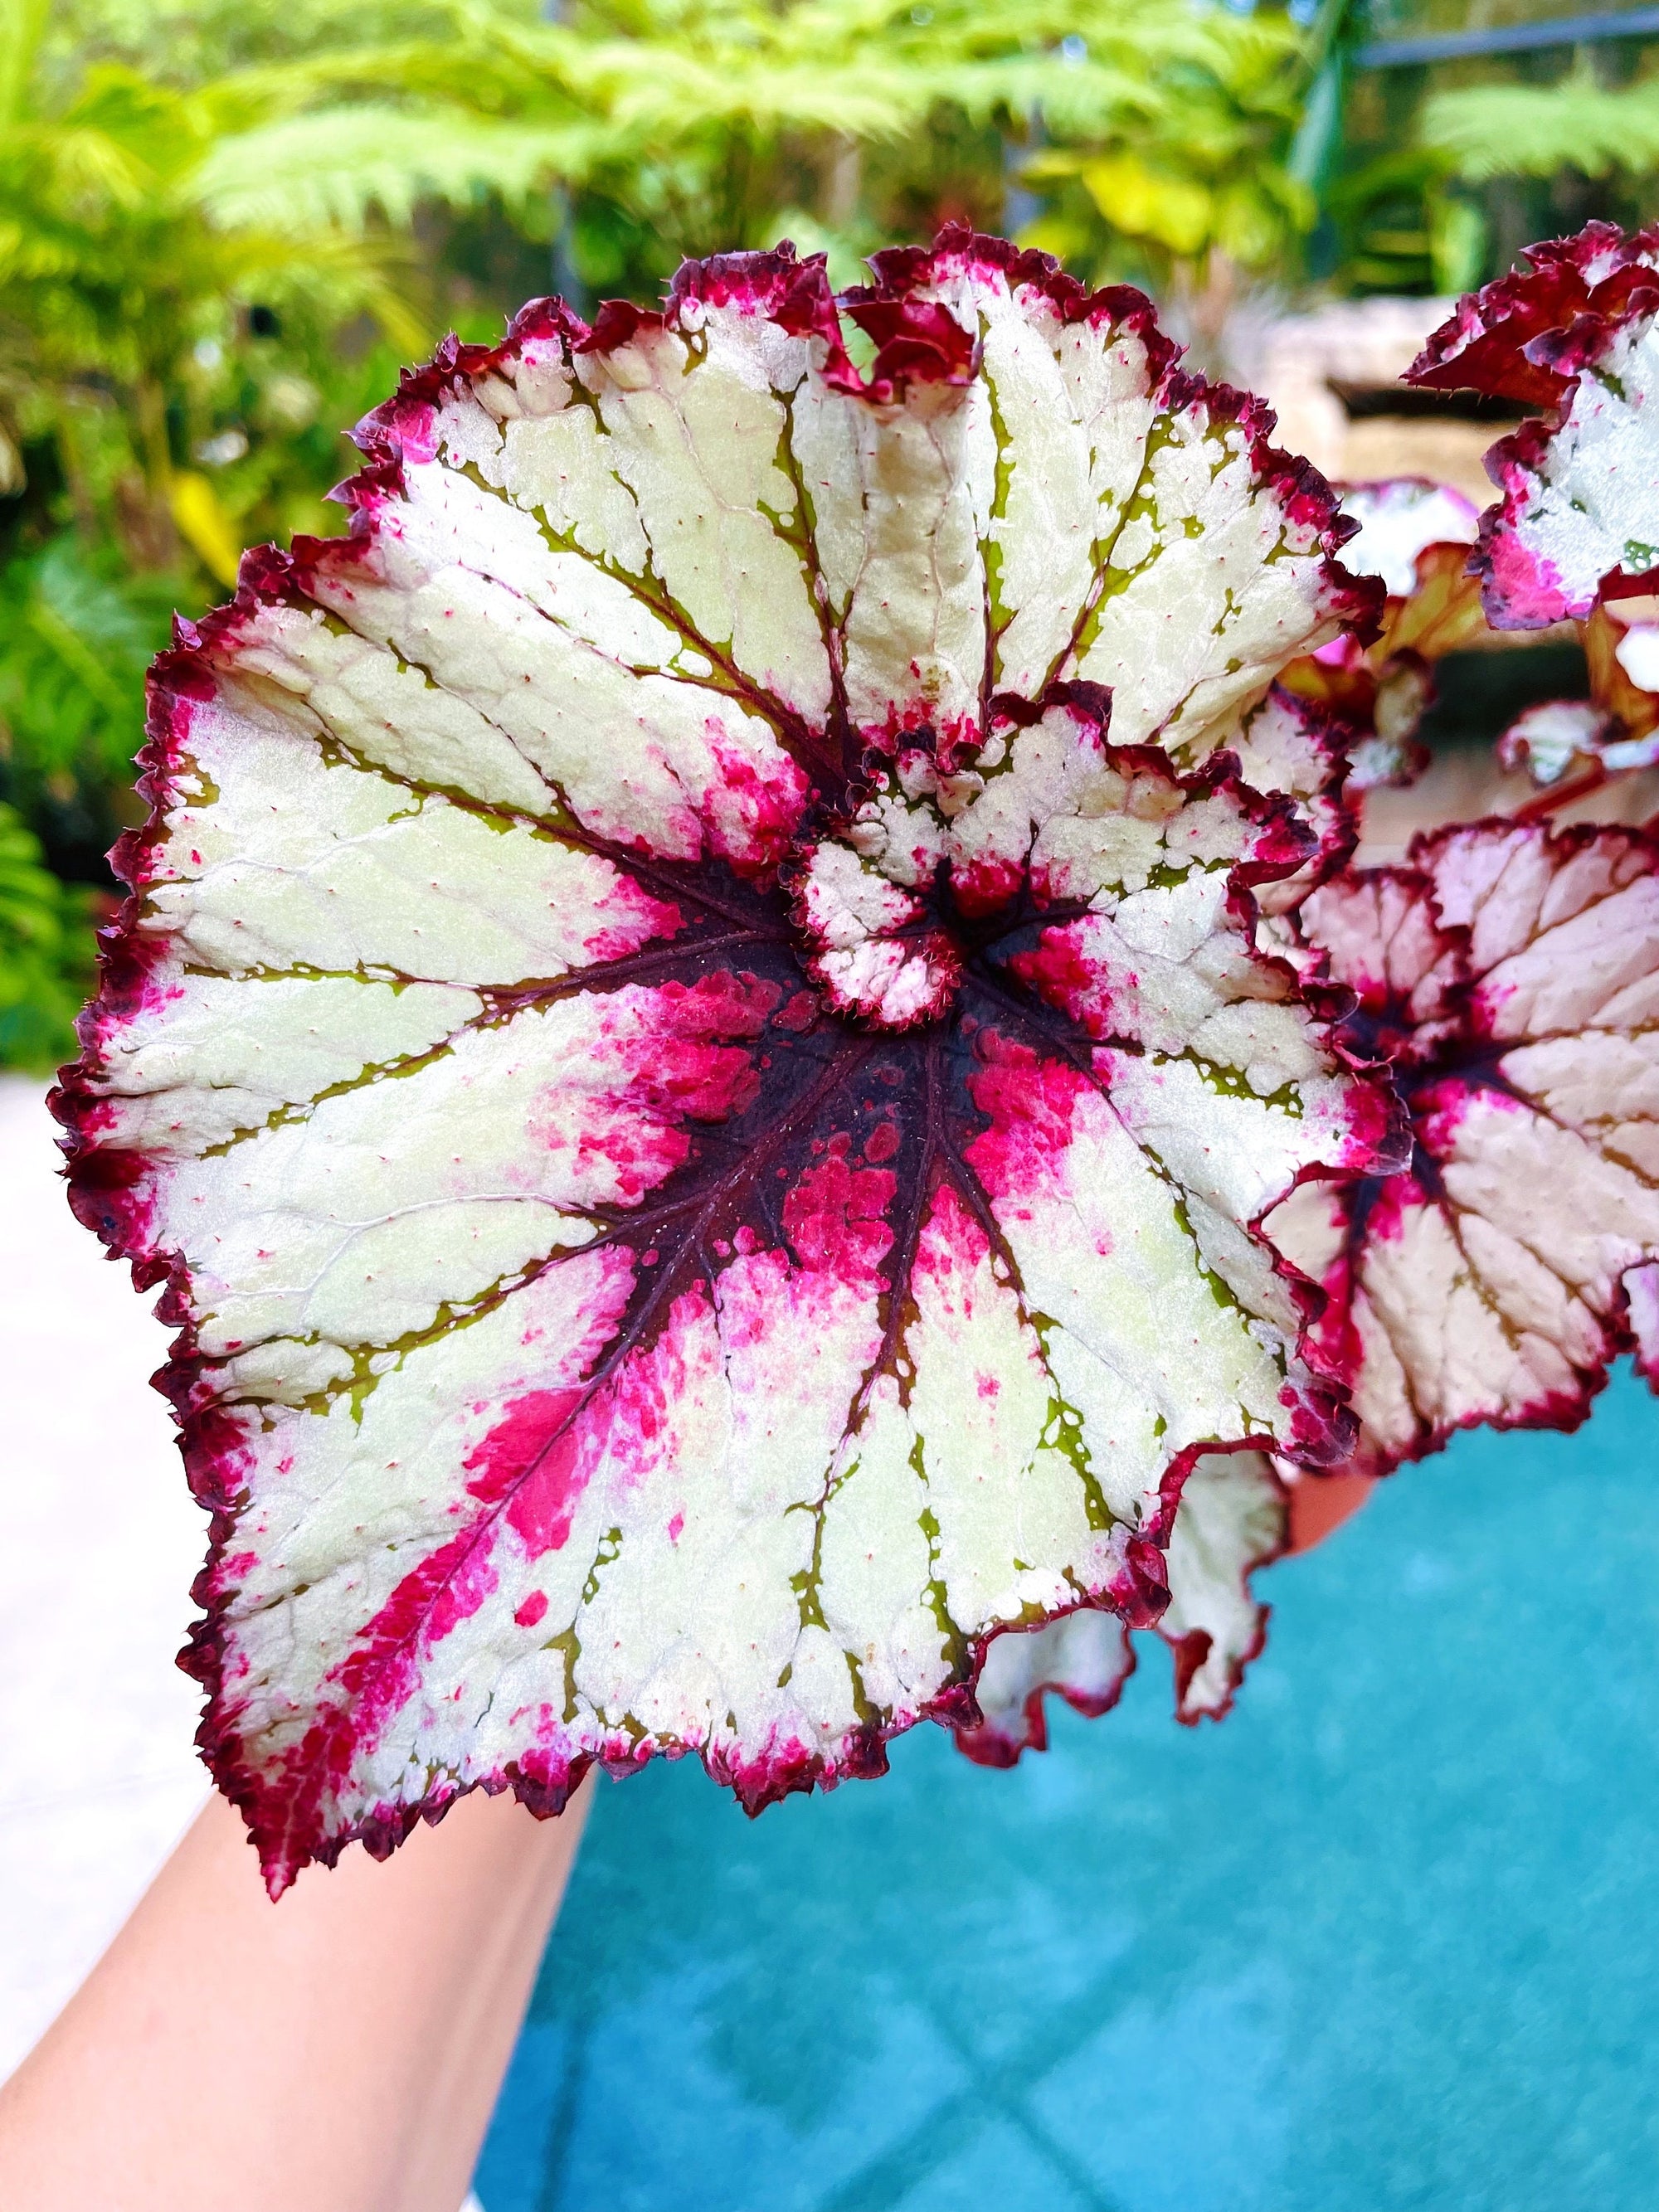 New Release Rex Begonia Harmonys Bloodmoon Live House Plant Potted 4 gift